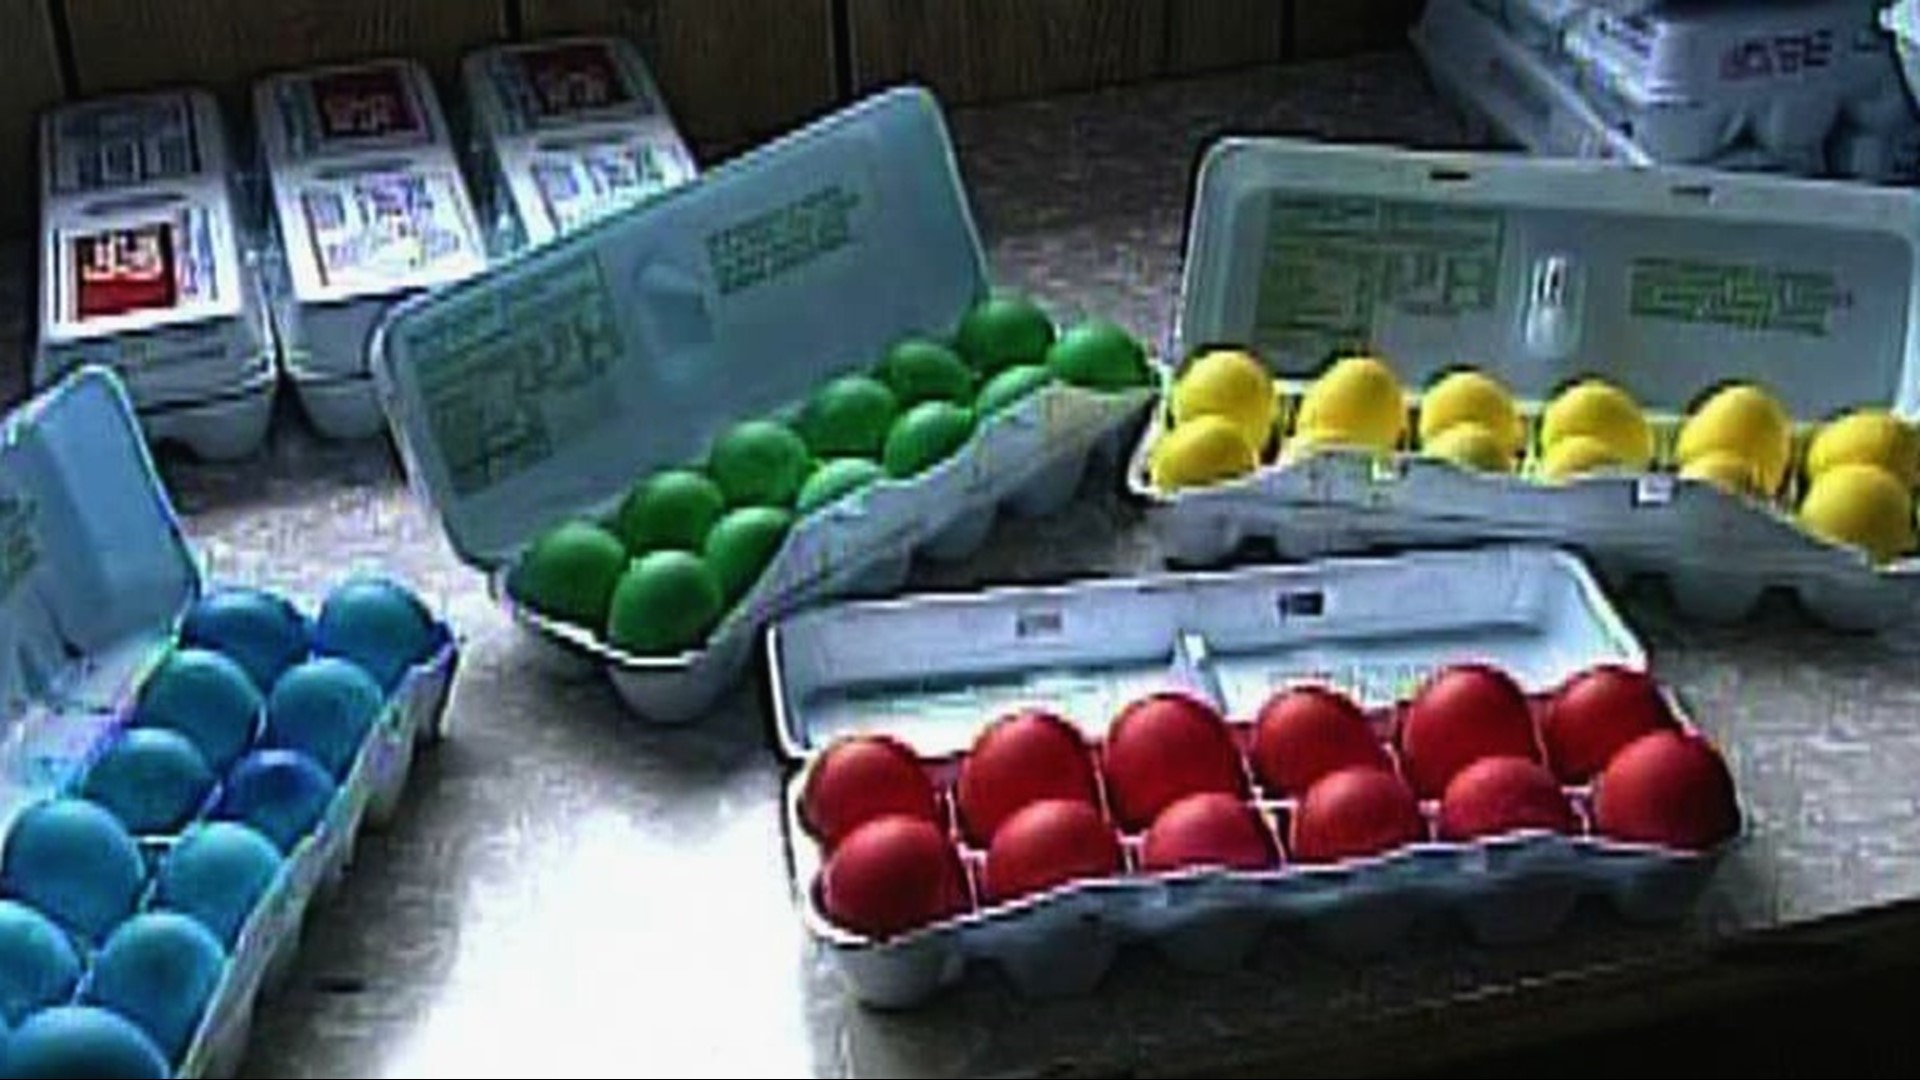 Dying Eggs By The Dozen